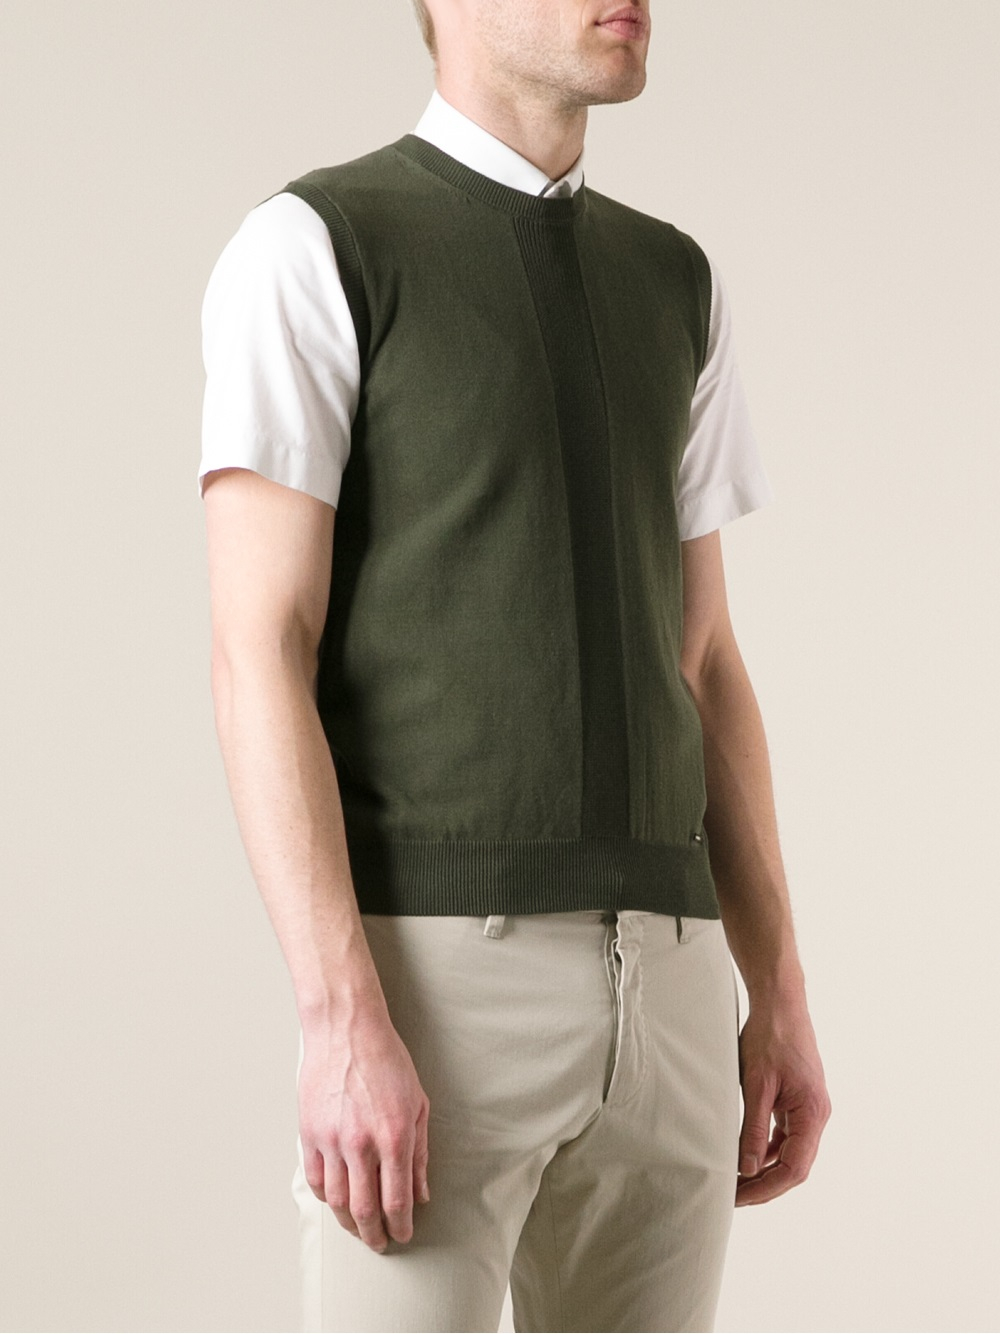 DSquared² Sleeveless Crew Neck Sweater in Green for Men - Lyst